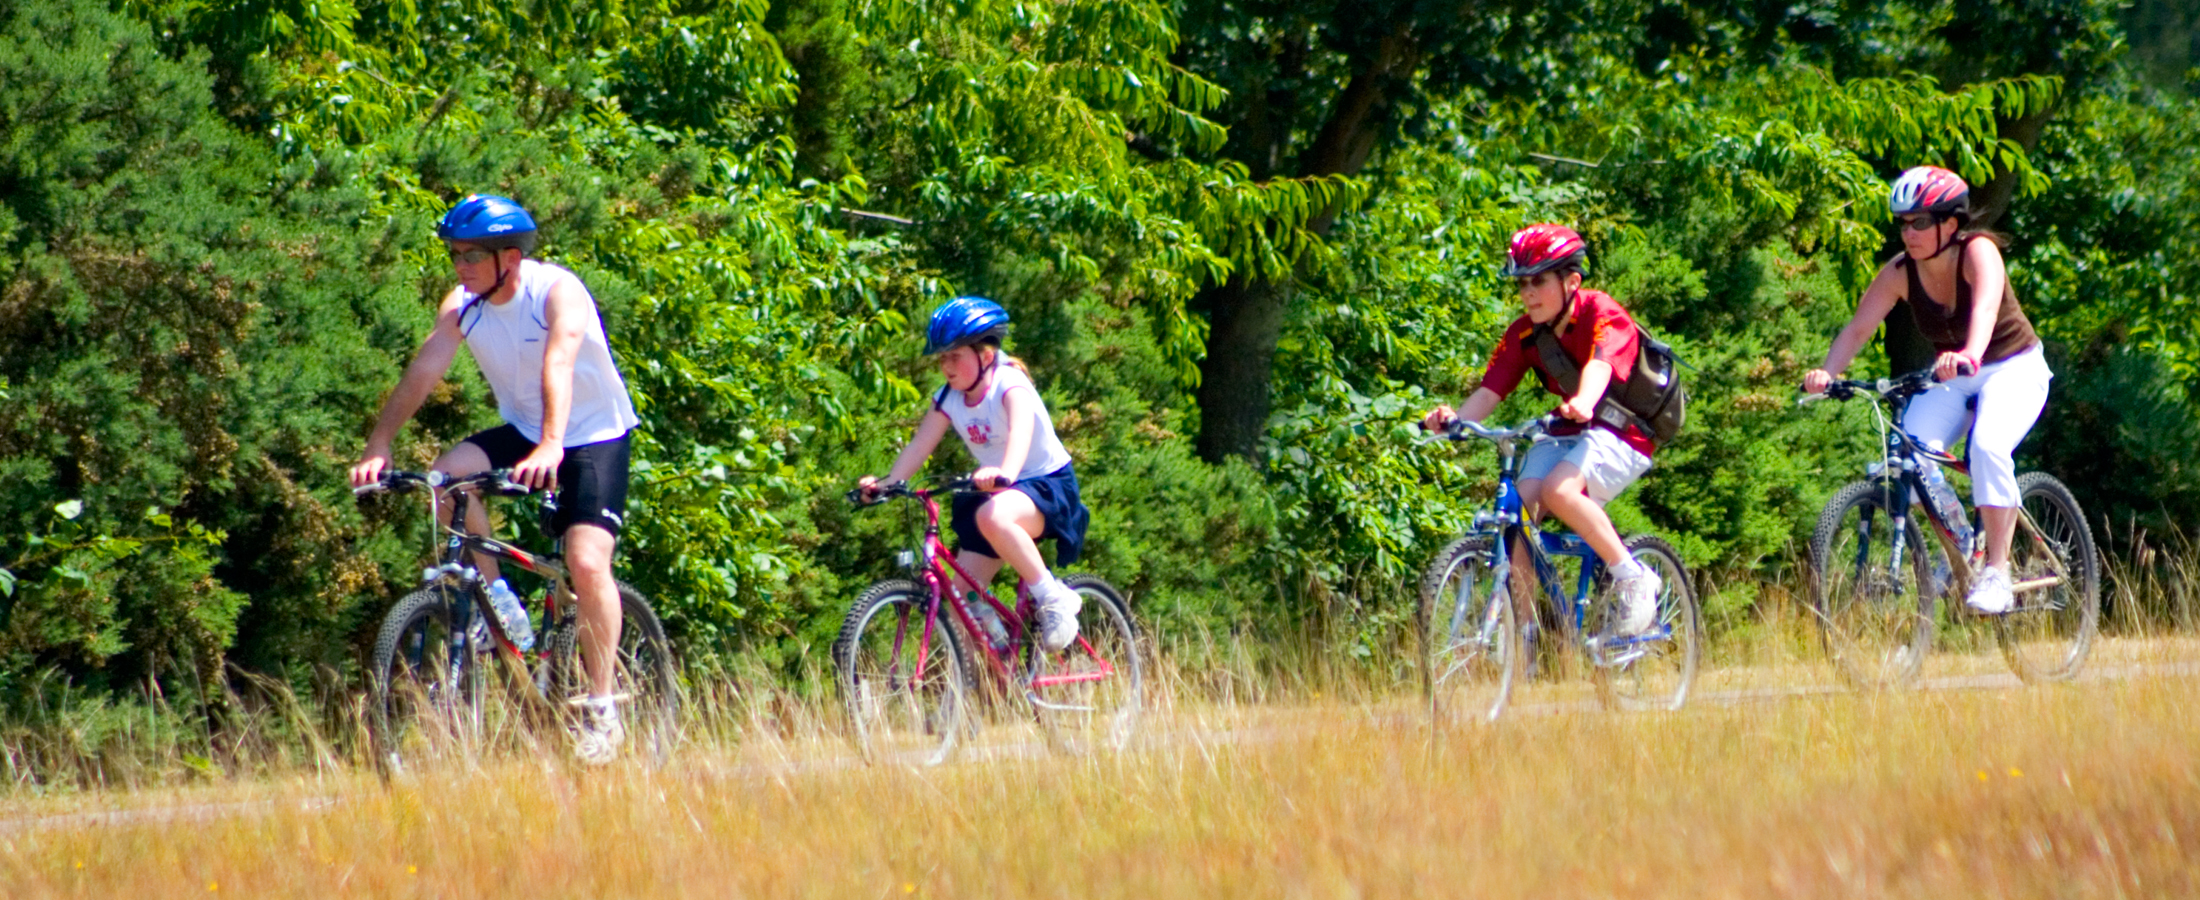 Two adults and two young people cycling together.